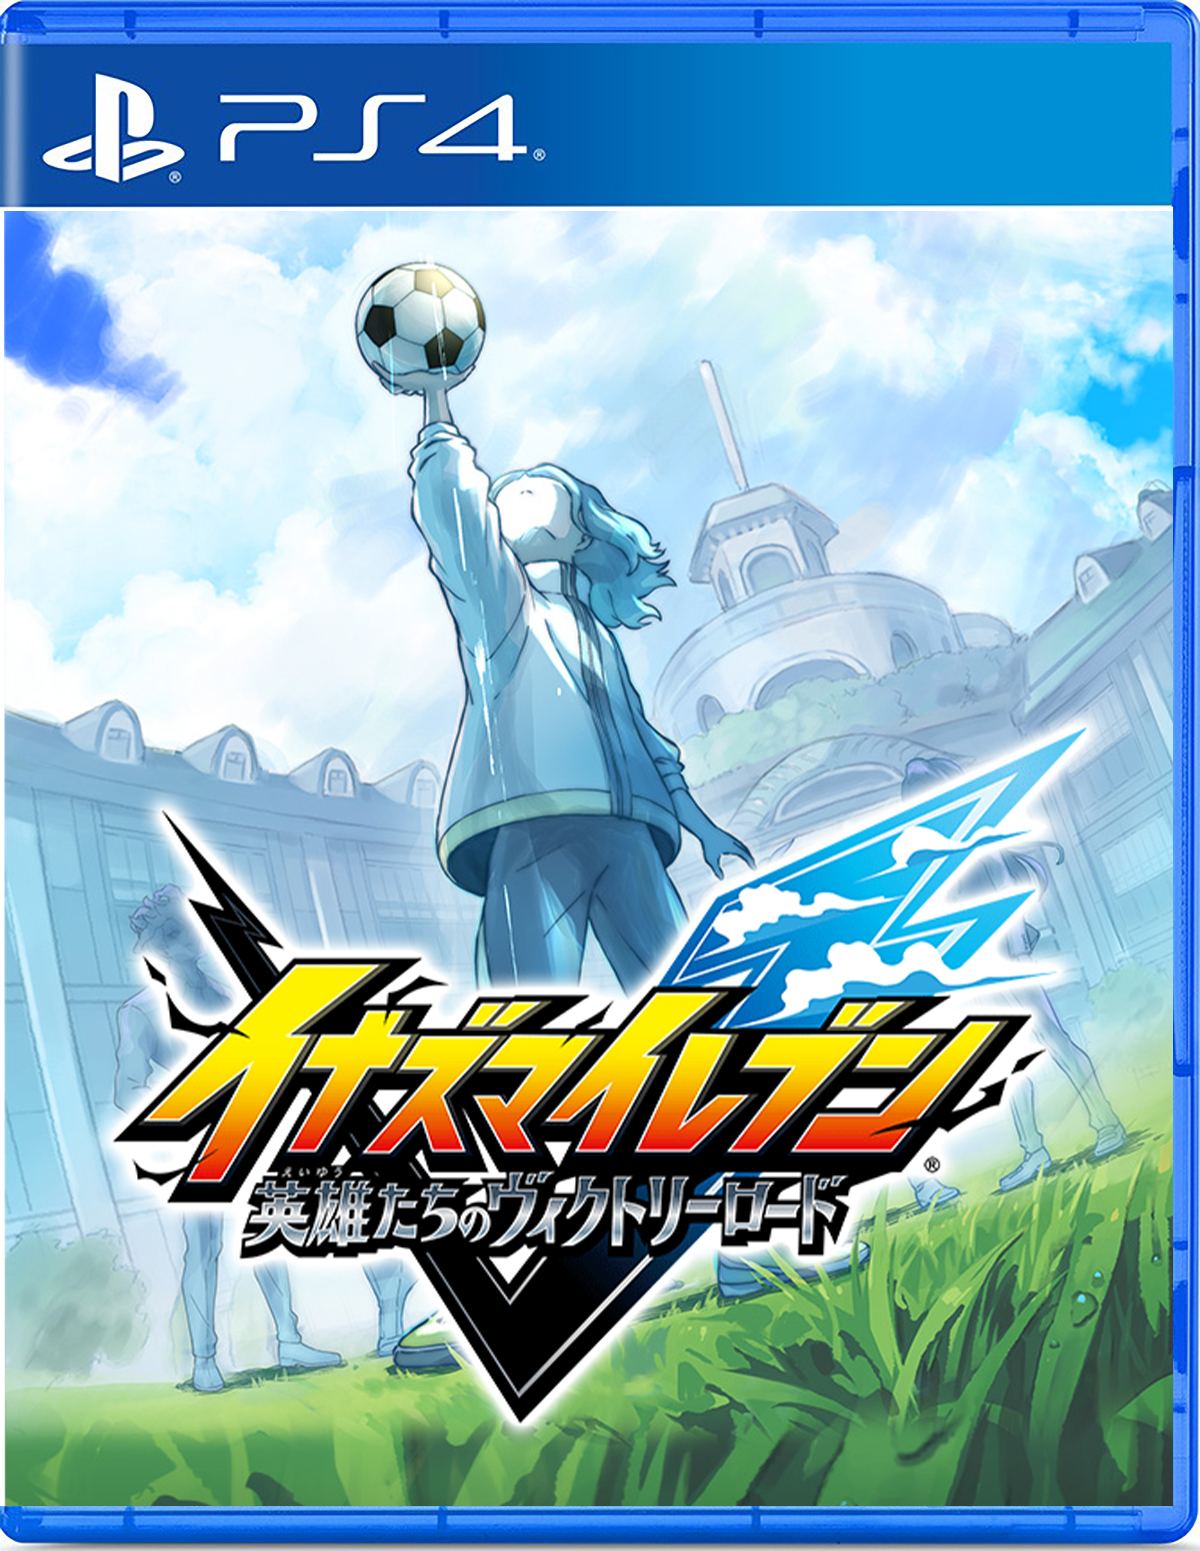 Inazuma Eleven: Victory Road of Heroes - soccer game system video